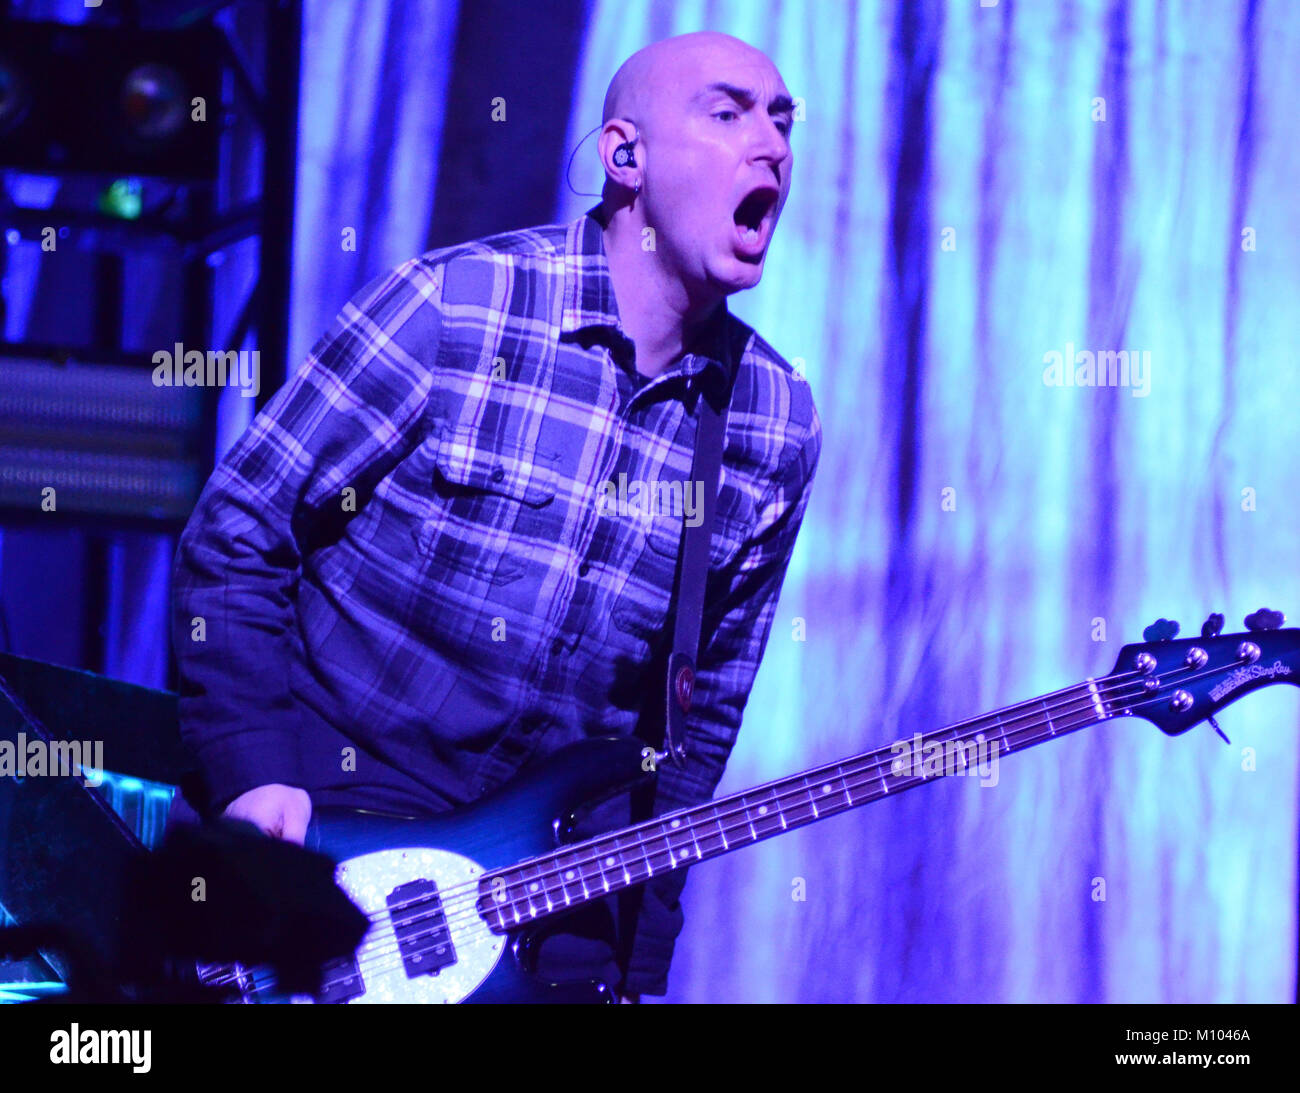 Green Bay, Wisconsin, USA. 24th Jan, 2018. Bassist Aaron Bruch of the band Breaking Benjamin performs at the Resch Center in Green Bay, Wisconsin. Ricky Bassman/CSM/Alamy Live News Stock Photo